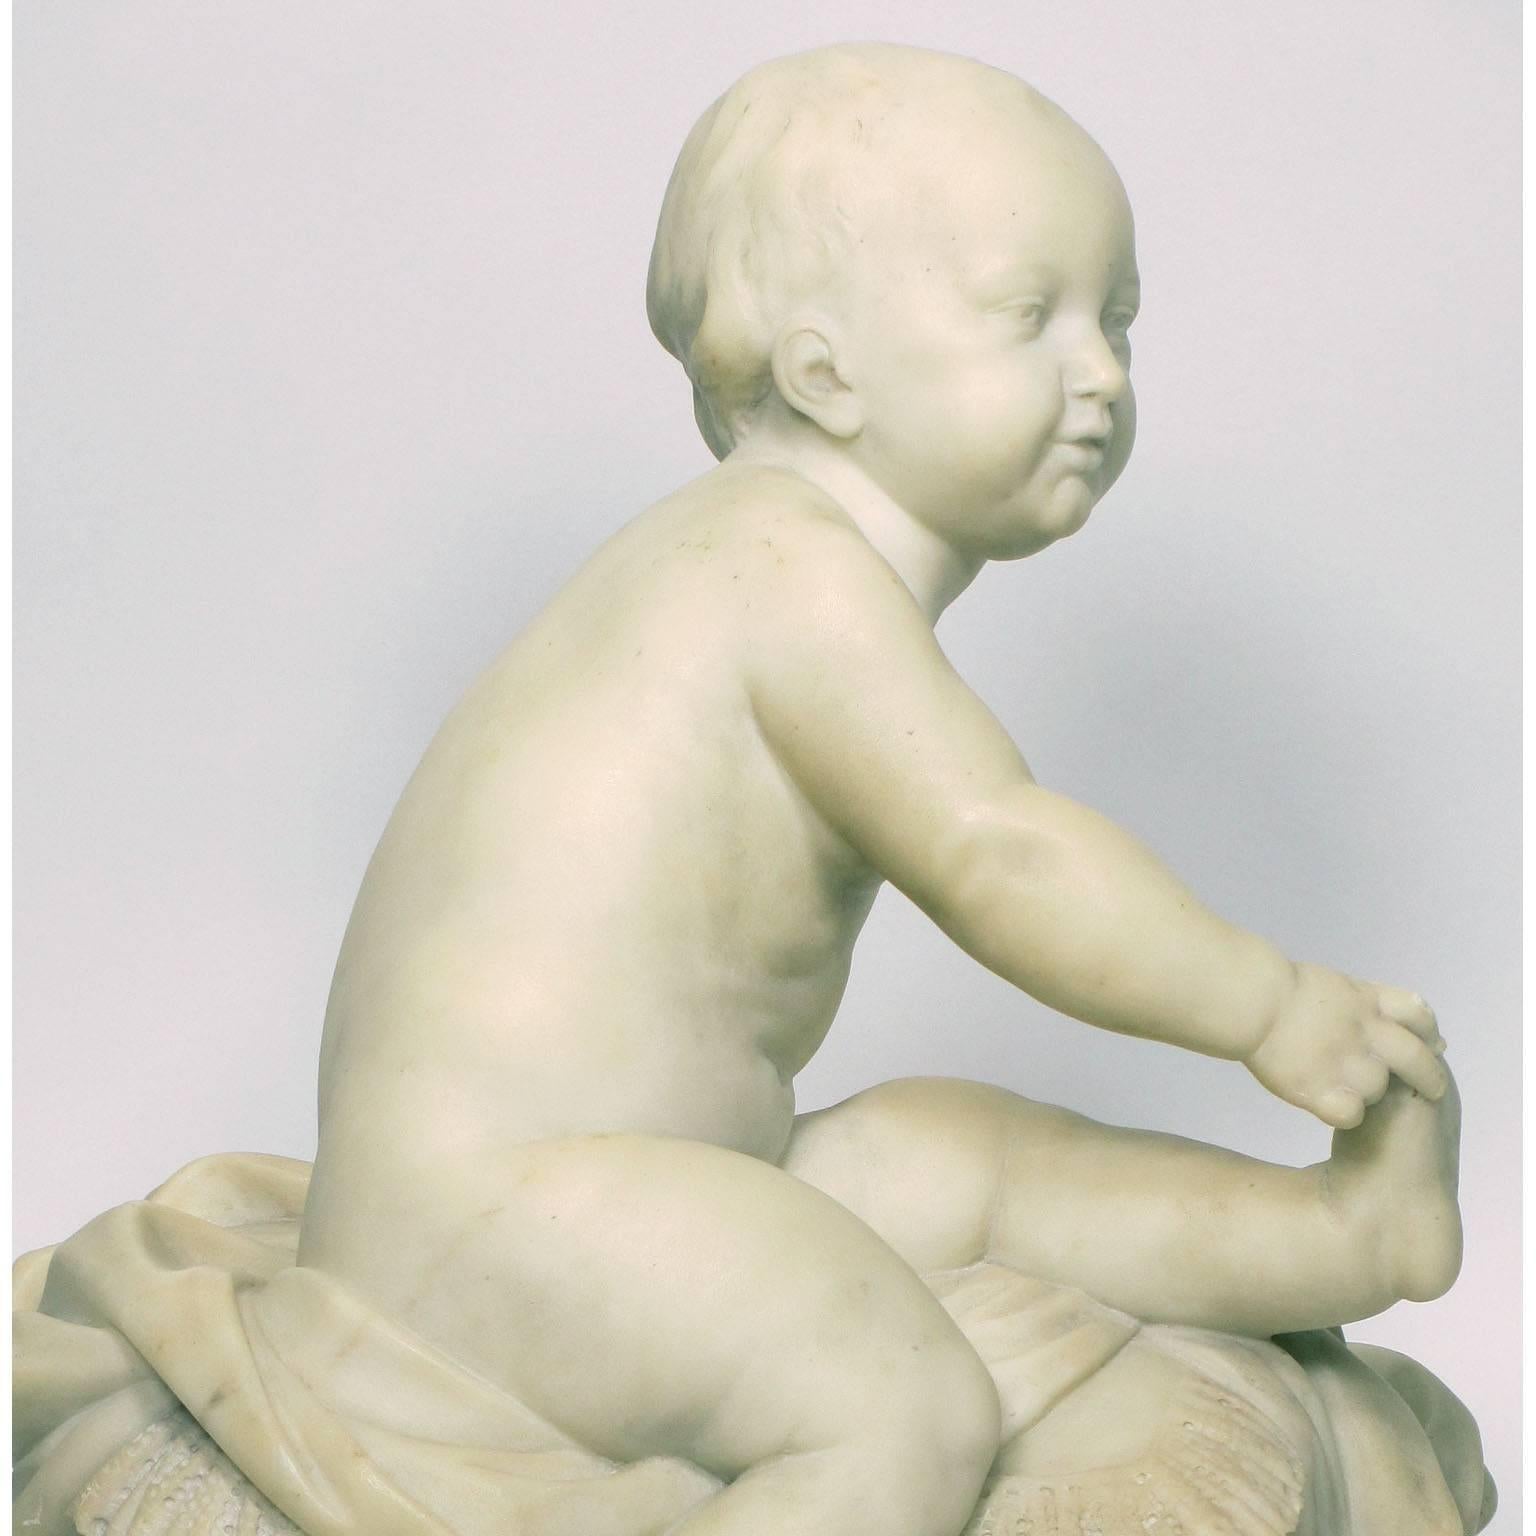 French 19th Century Carved Marble Sculpture of a Young Boy Prince on a Pillow For Sale 1